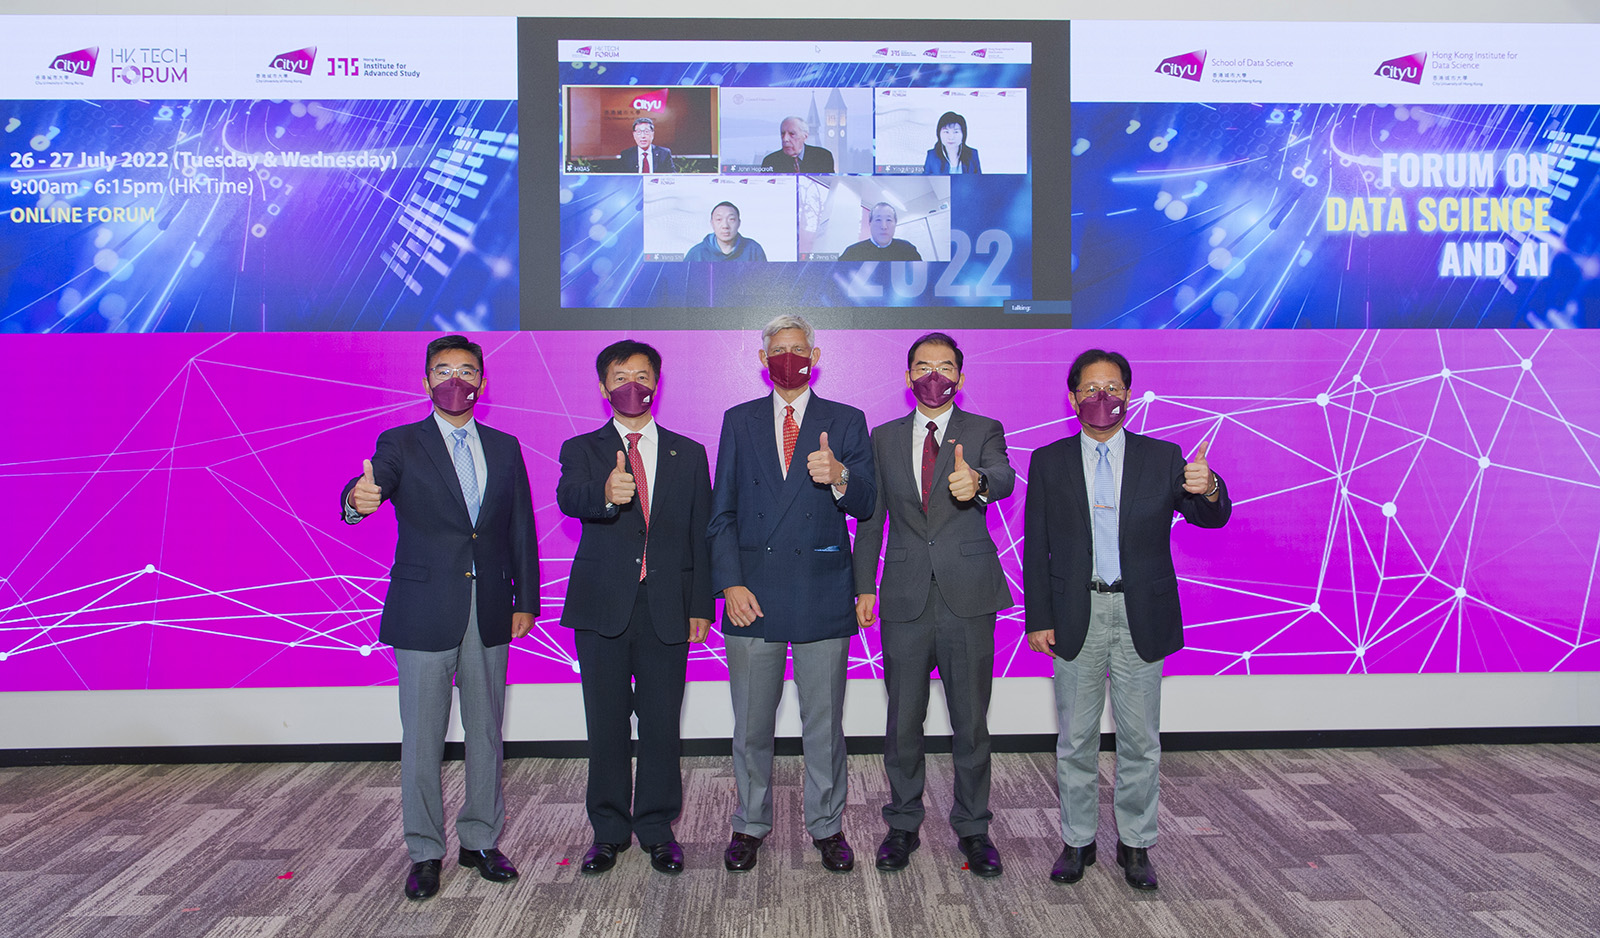 The first HK Tech Forum opened at 26 July gathered world-renowned scholars in data science and AI to exchange new ideas and spark technological development.
